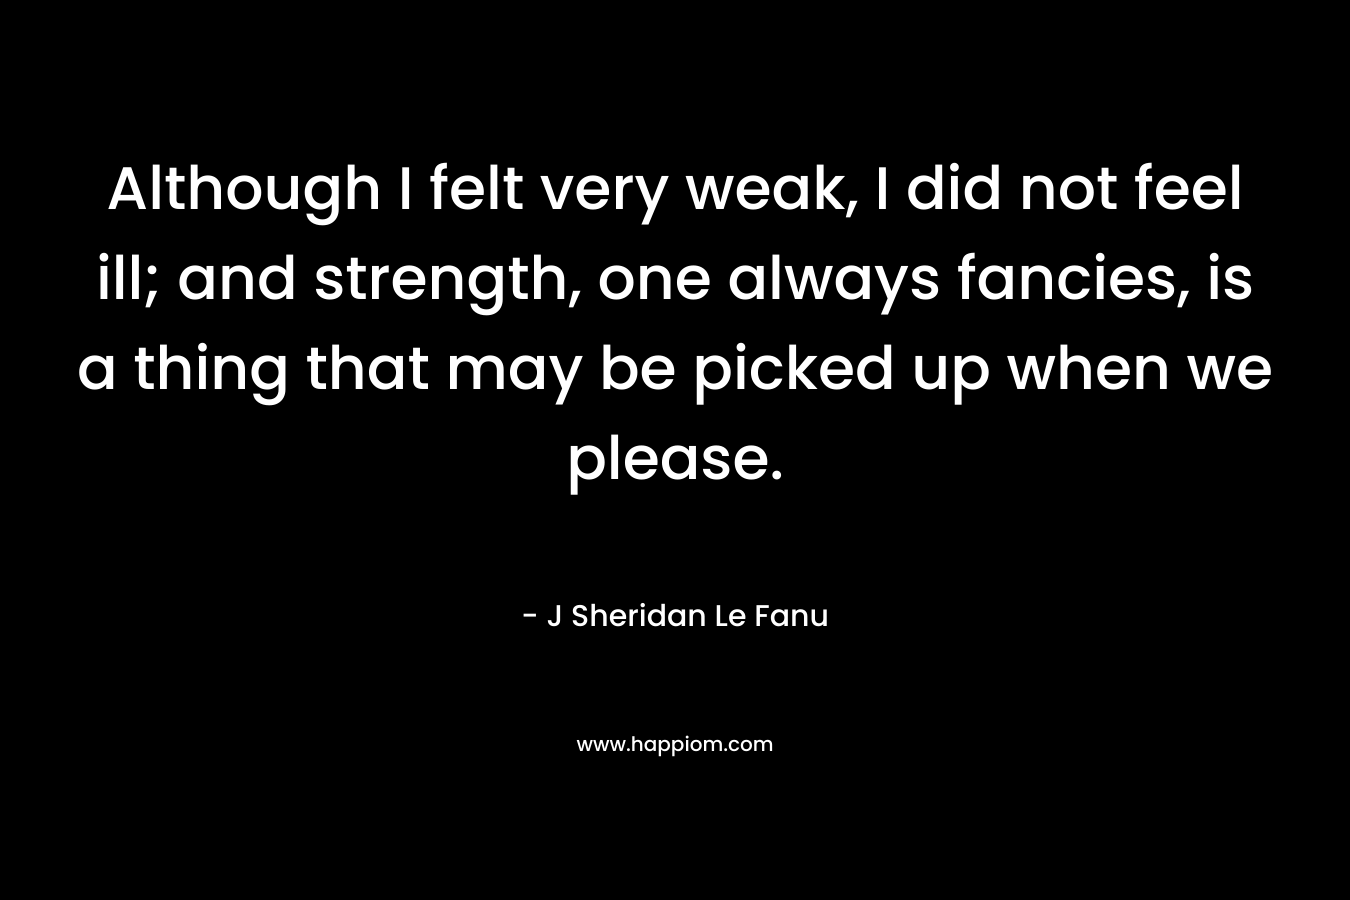 Although I felt very weak, I did not feel ill; and strength, one always fancies, is a thing that may be picked up when we please. – J Sheridan Le Fanu